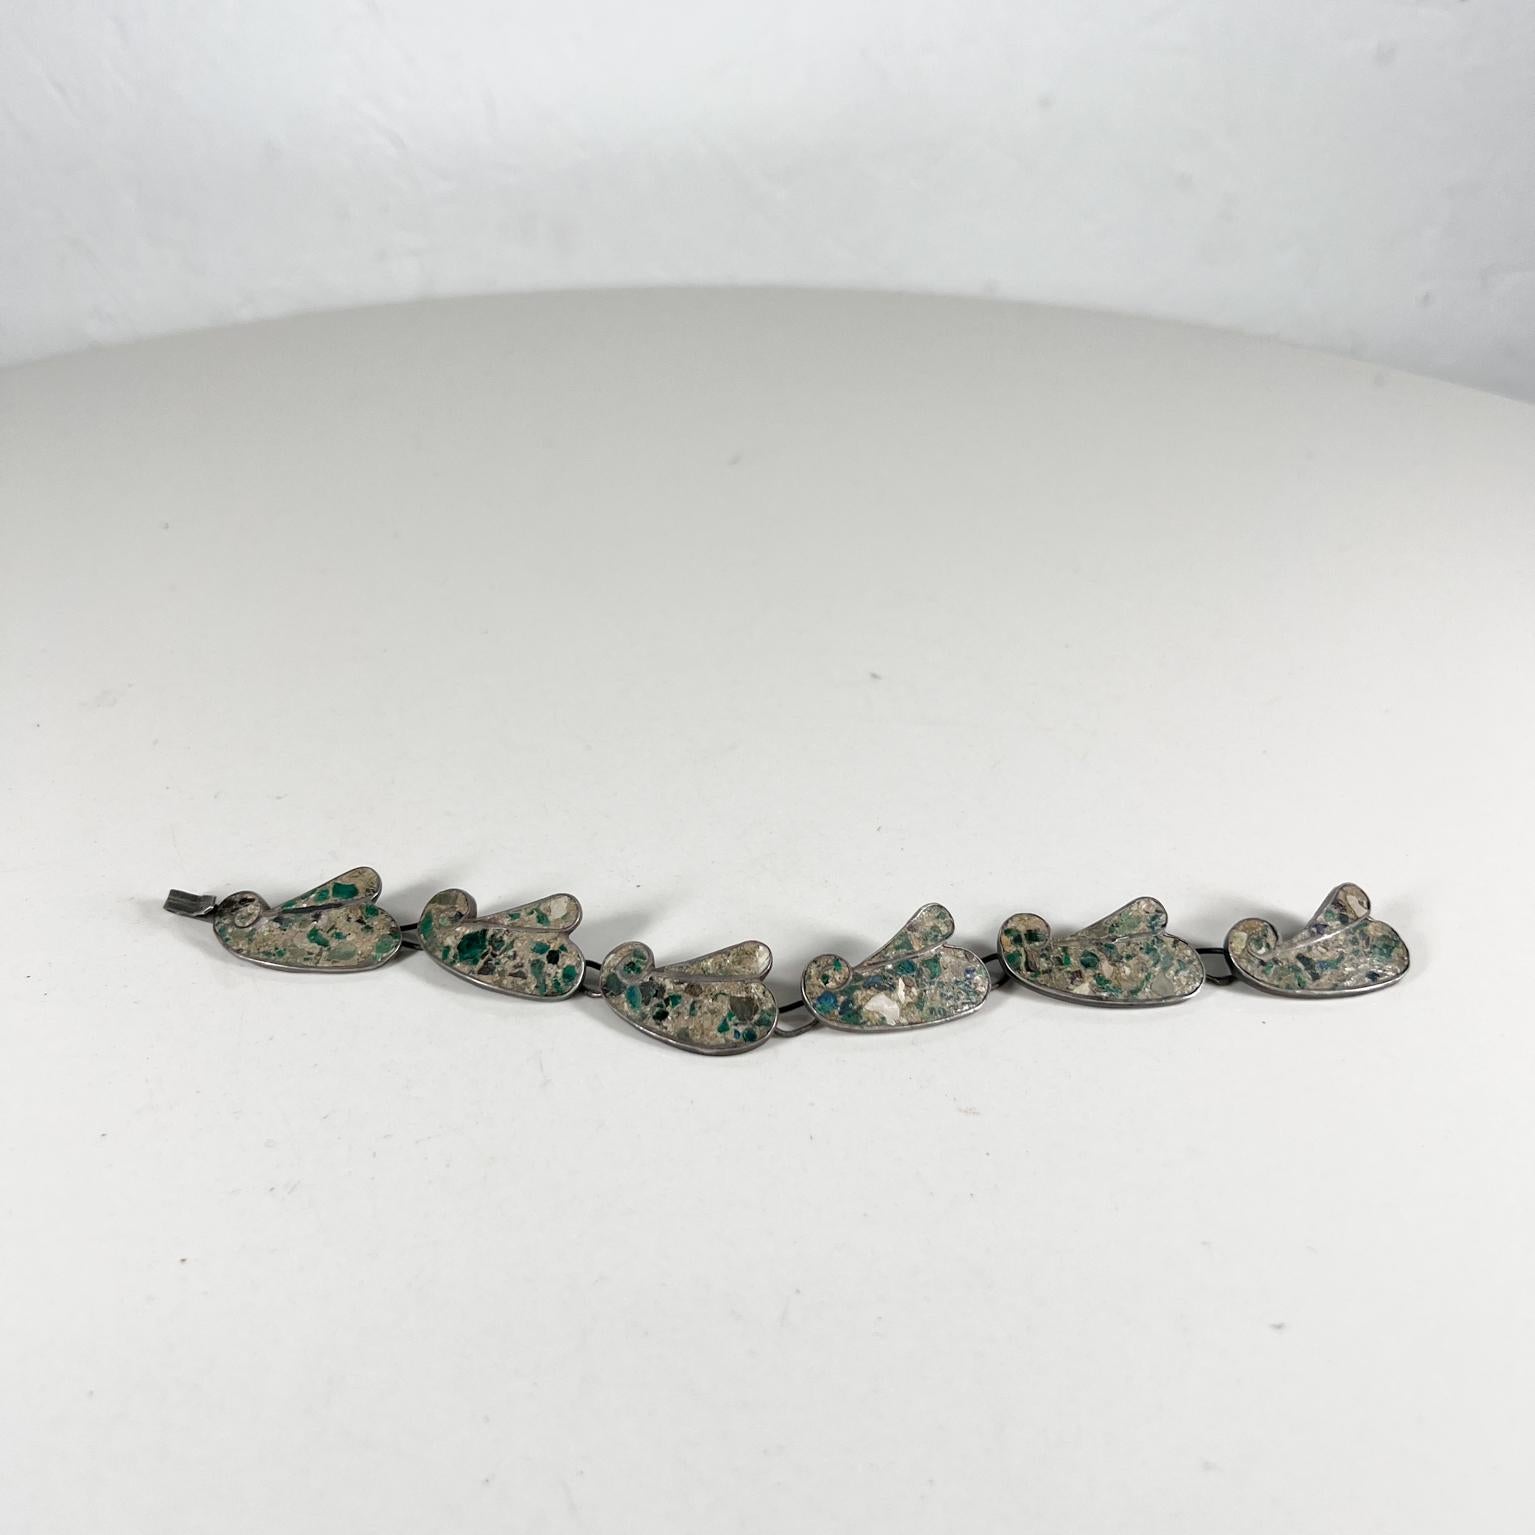 1970s Modernist Mexican sterling silver malachite bracelet from Mexico.
Maker stamped. 925 Mexico.
Measures: 7.38 long x .63 wide x .13 thick
Preowned original vintage condition.
See images please.
 